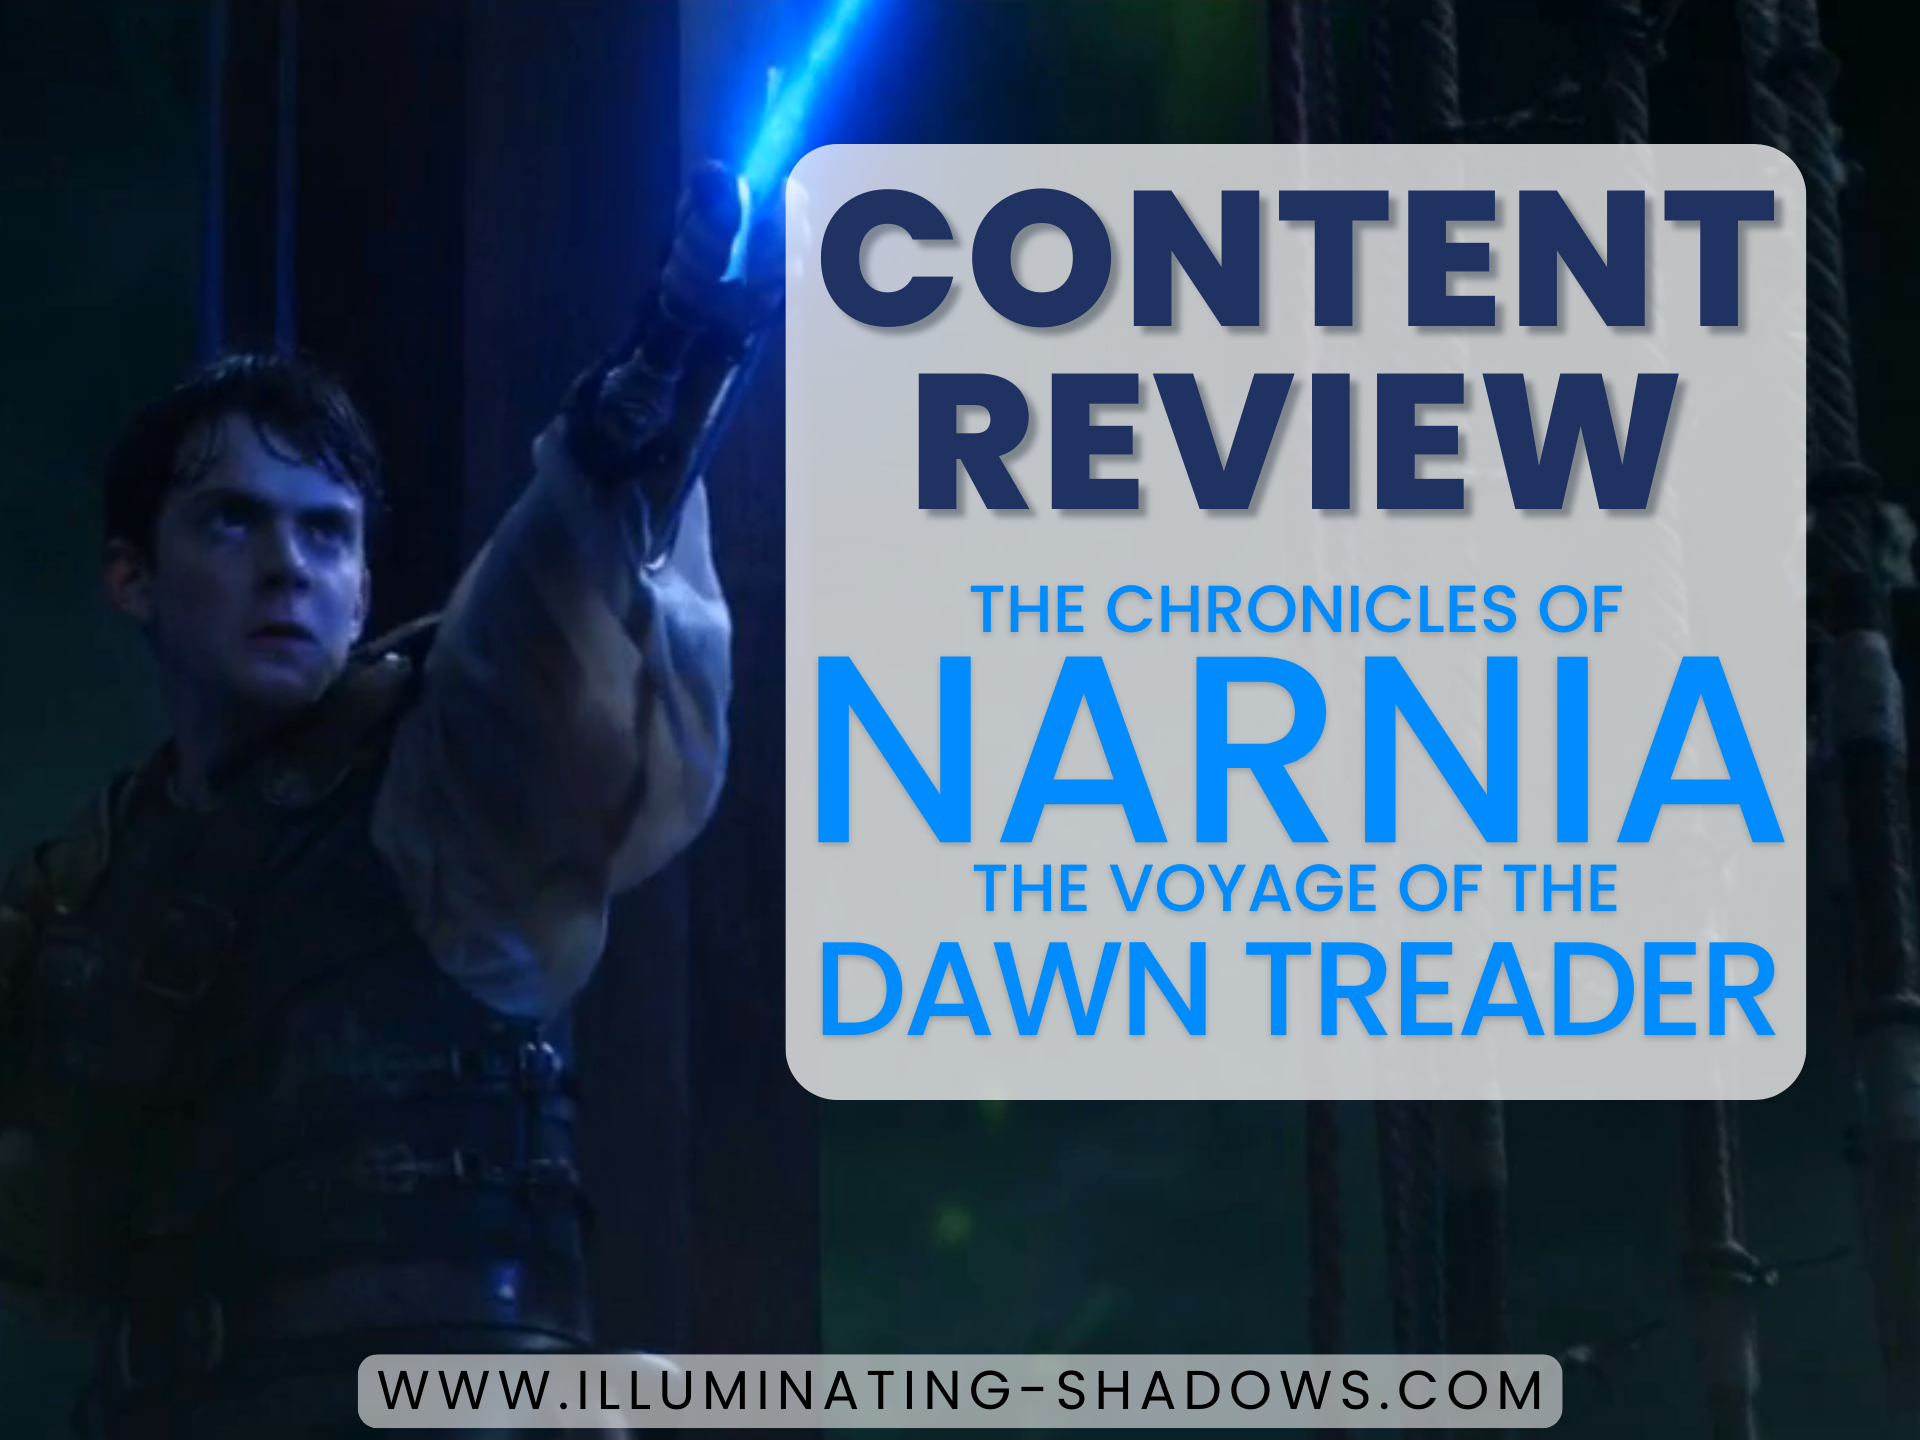 The Chronicles of Narnia: The Voyage of the Dawn Treader - Content Review - Picture of Edmund holding a blue glowing sword